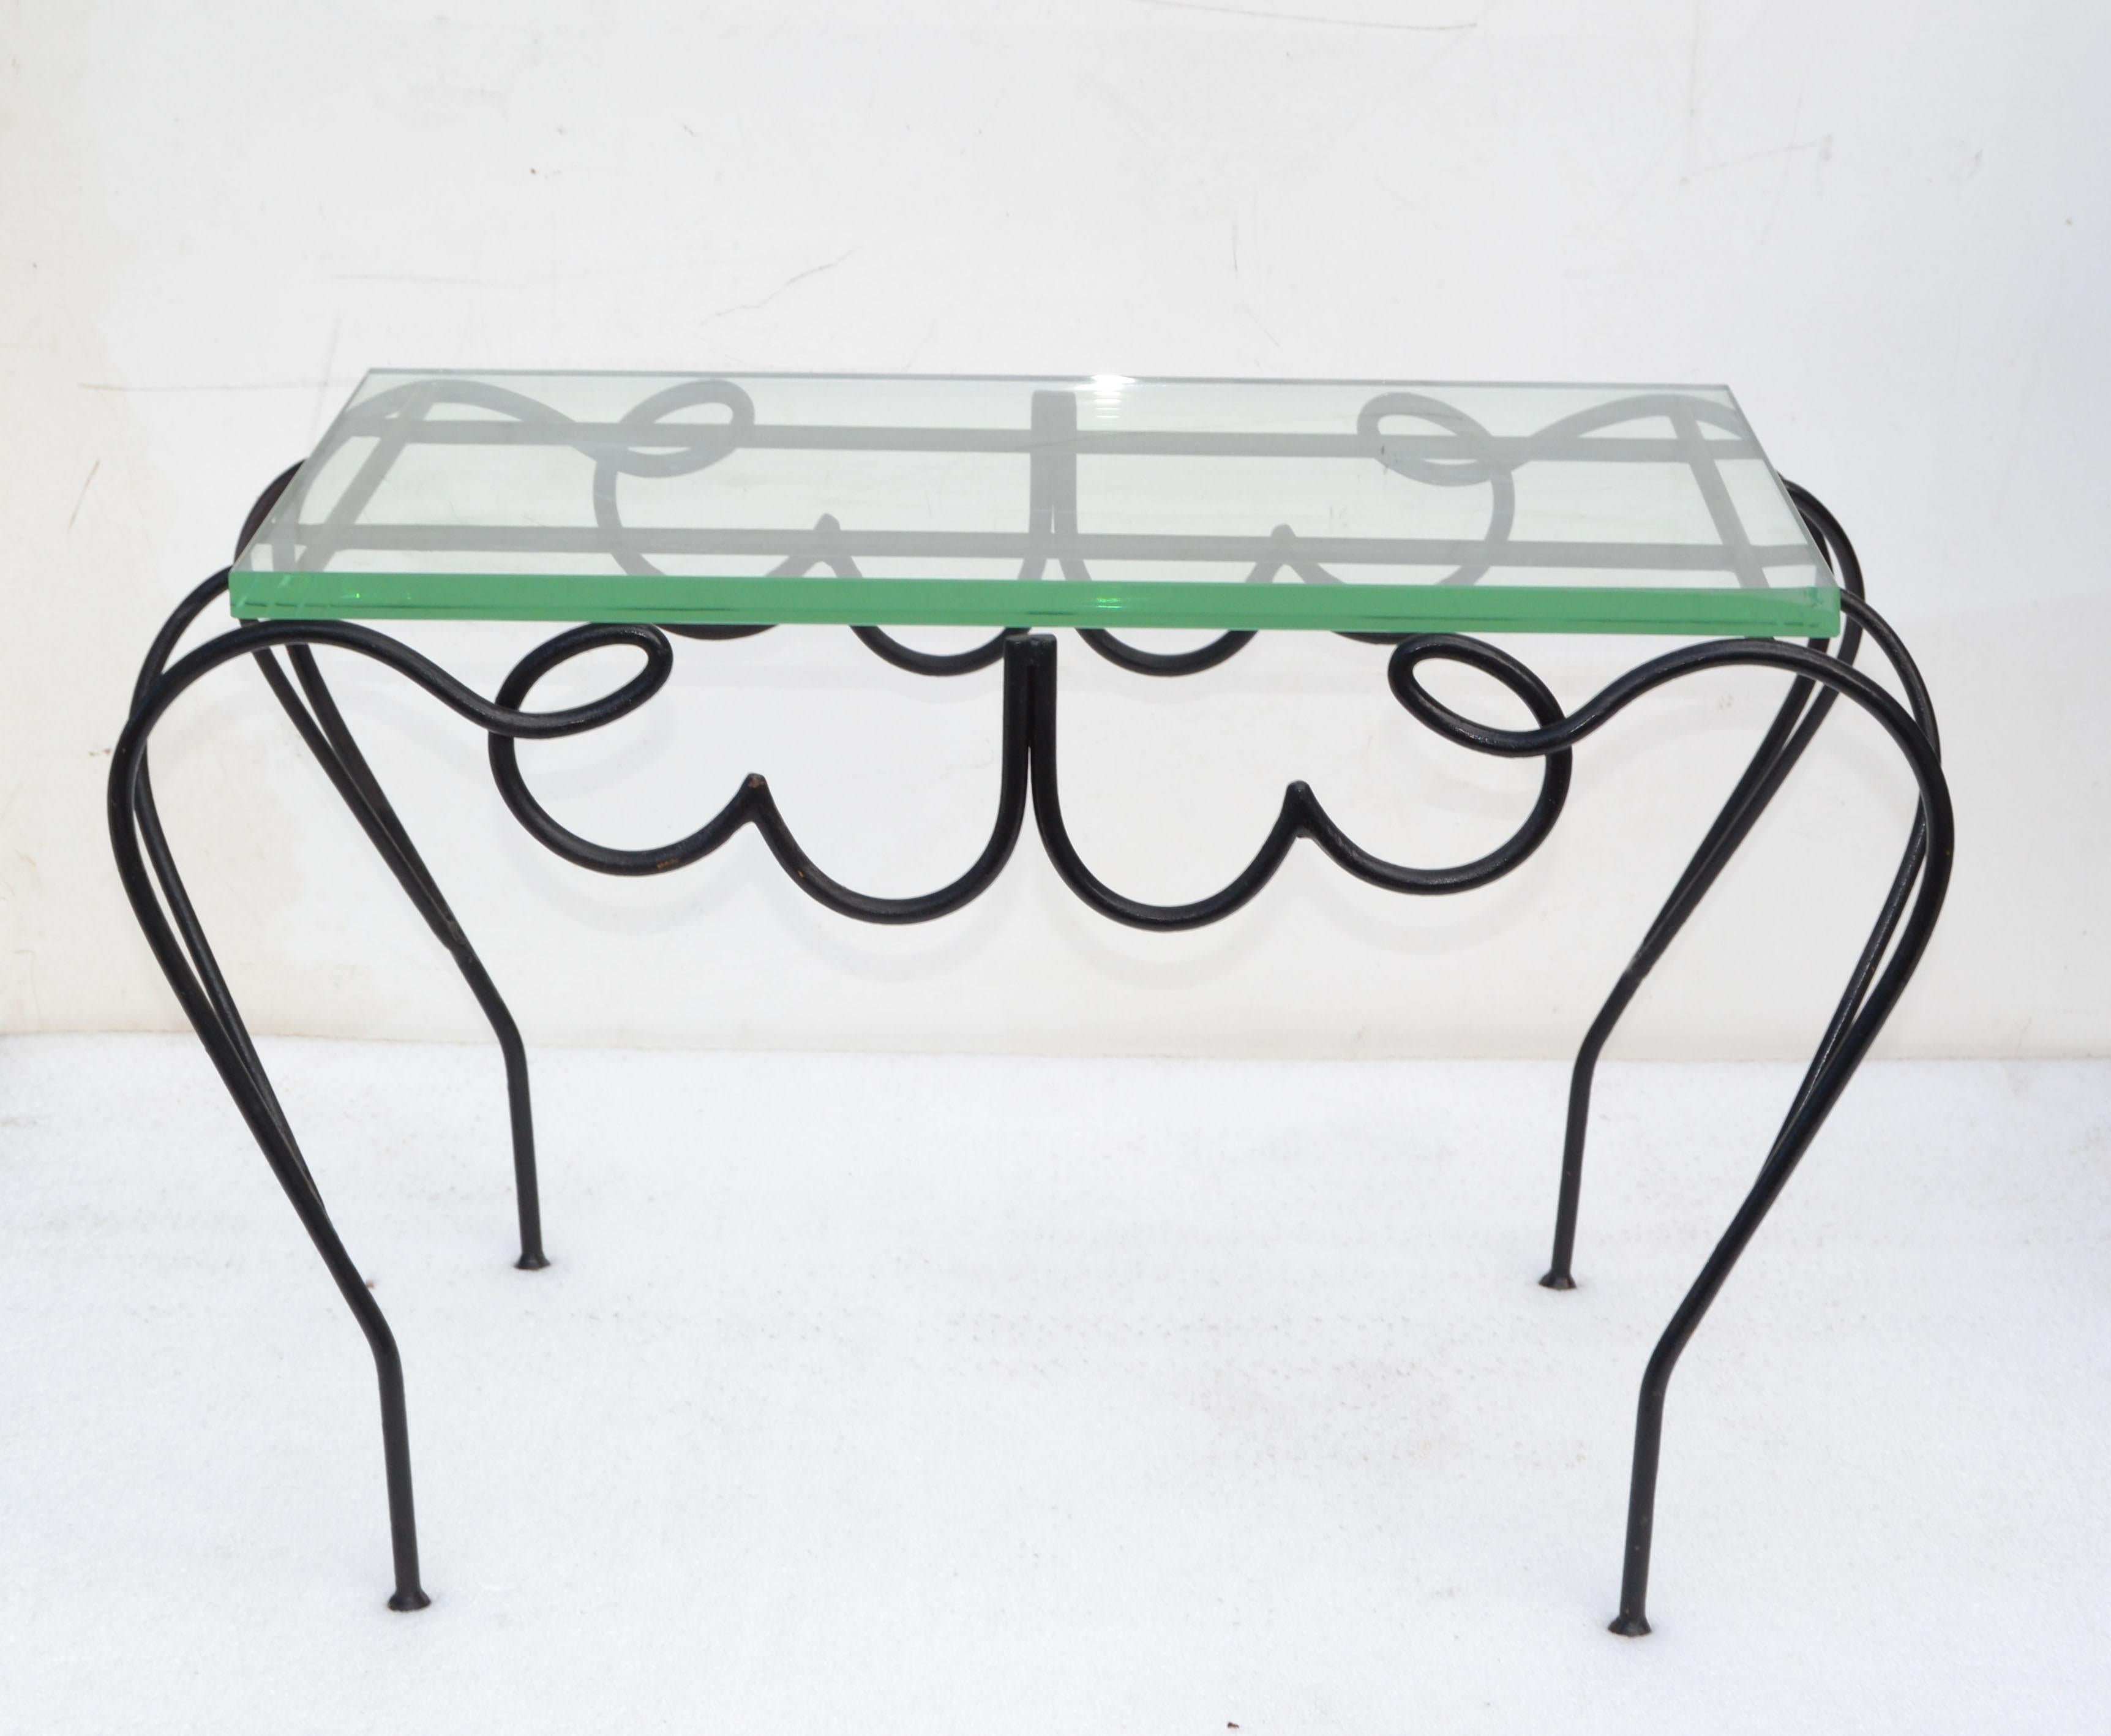 Iconic 1930 Jean Prouvé Black Wrought Iron and Glass Side, End or Sofa Table made in France in 1930.
Comes with the original 0.63 inches thick Glass Top.
All original condition with a small chip at the corner.